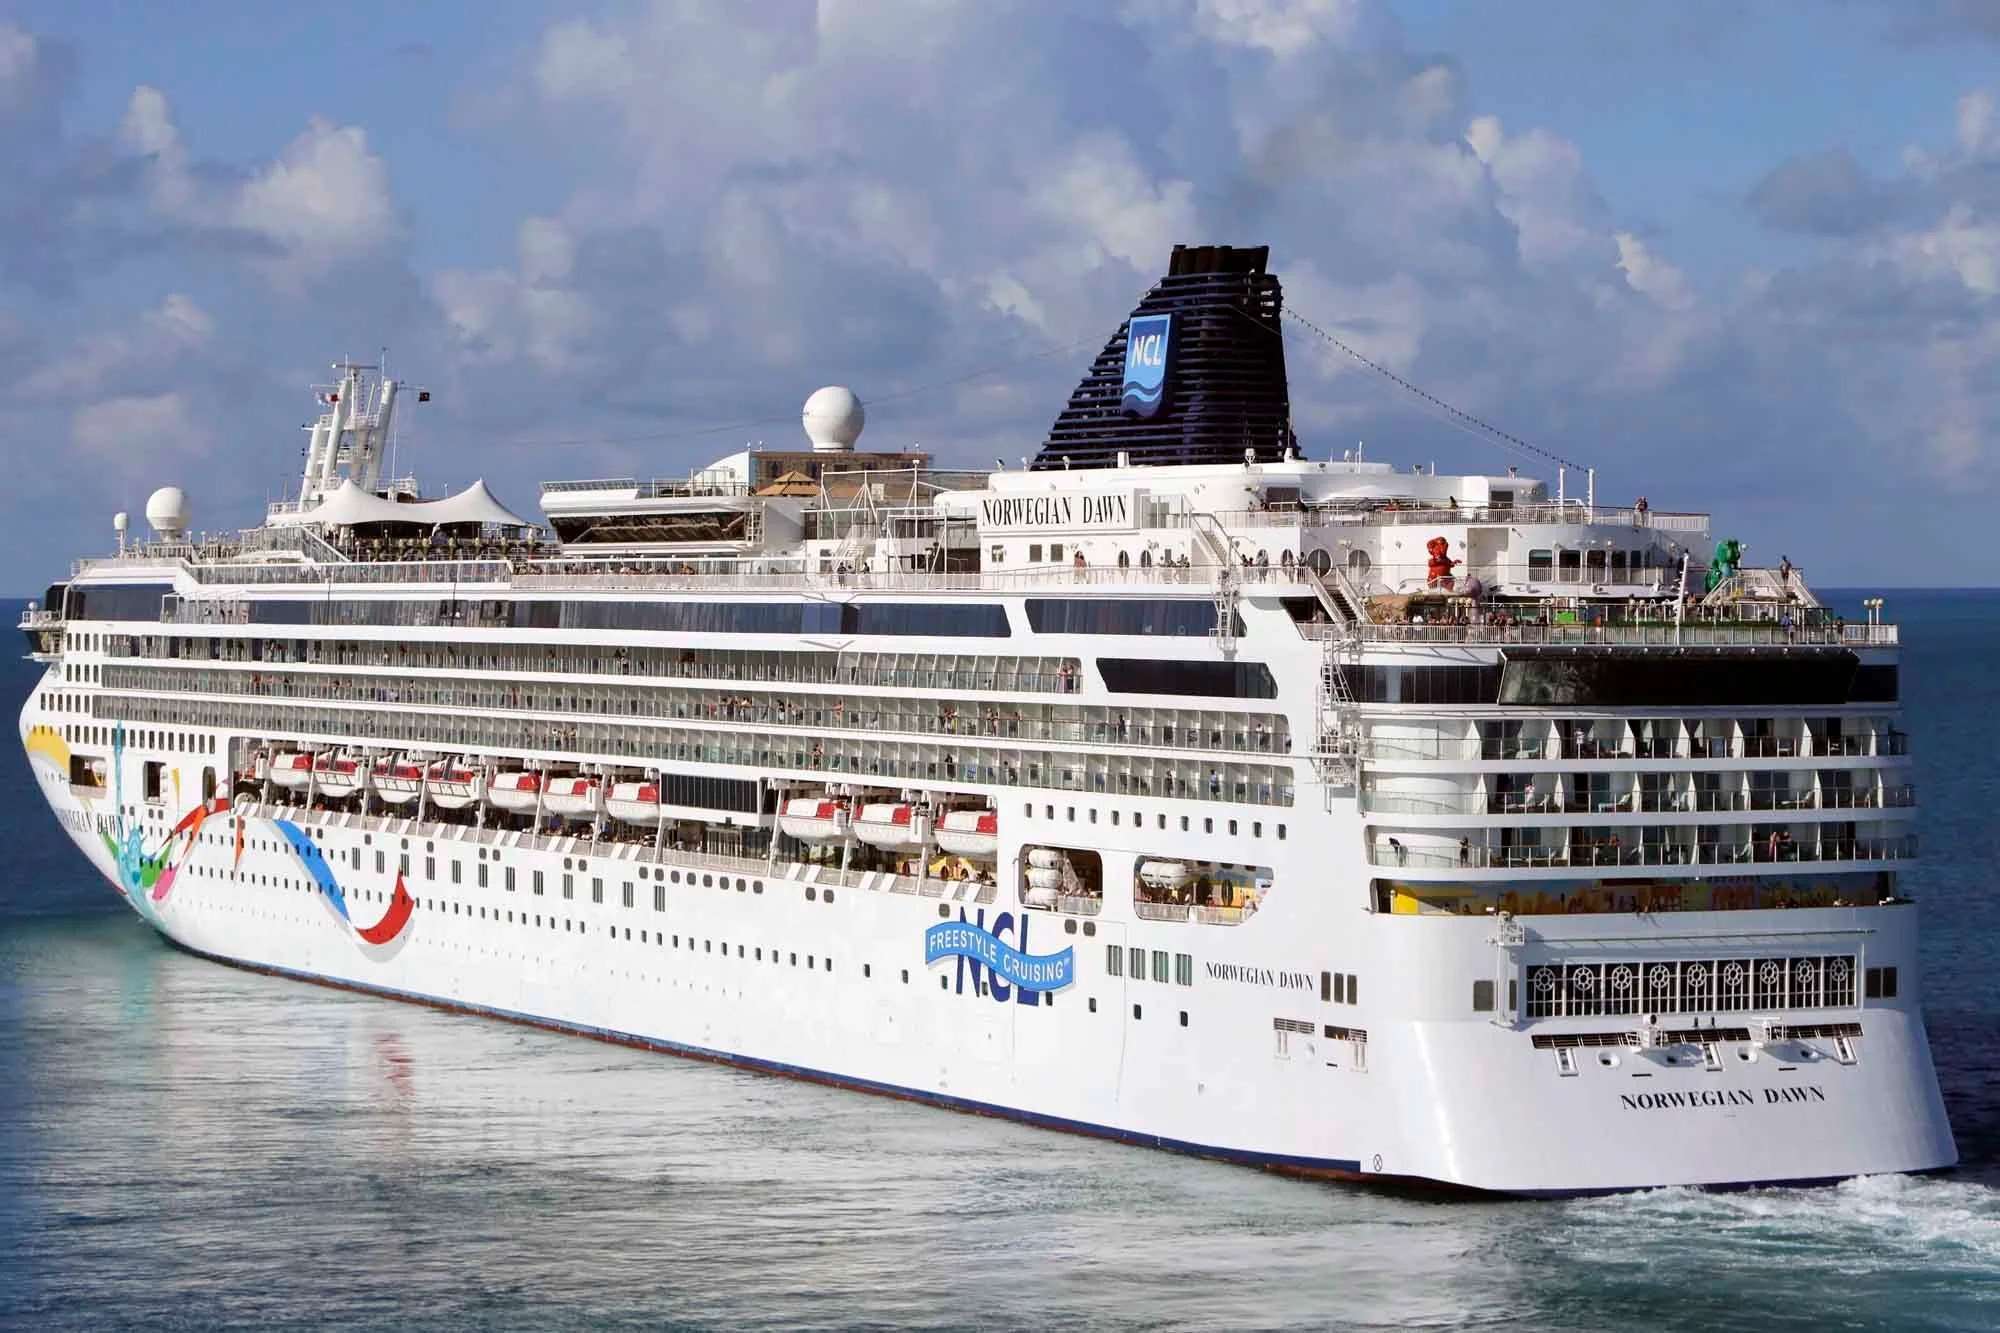 Cruise ship that ran aground in Bermuda waits for inspection